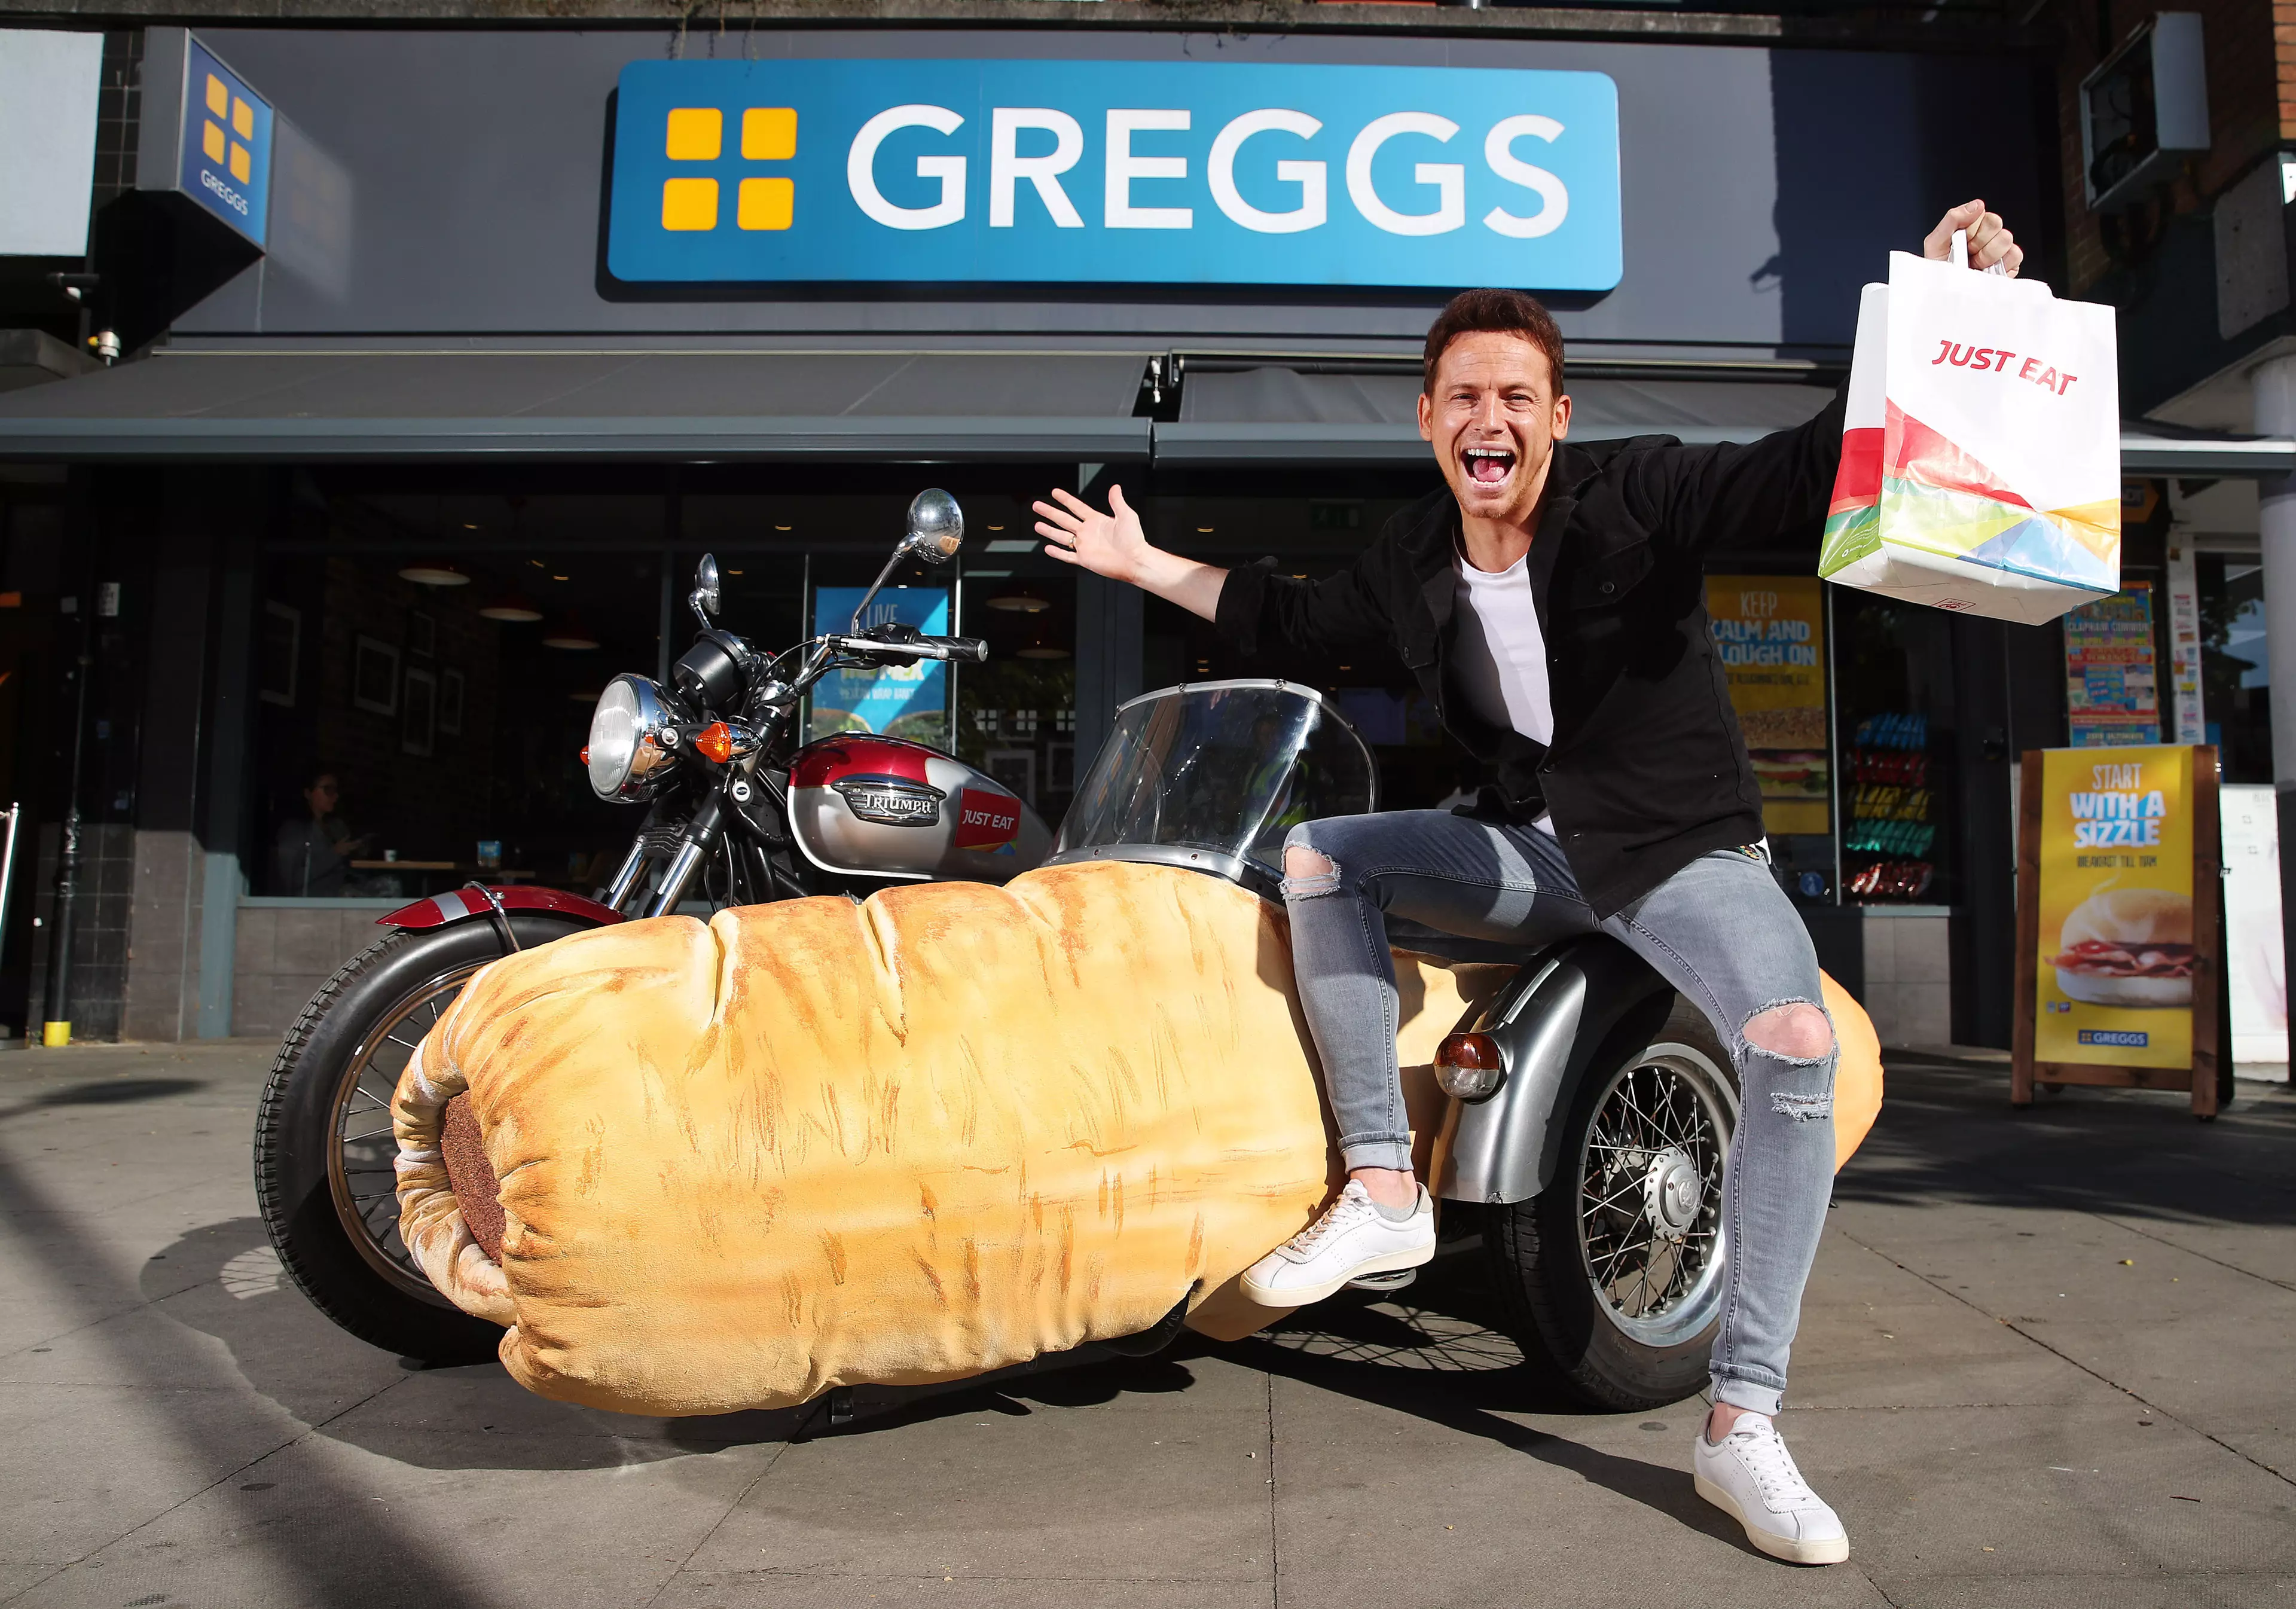 Joe Swash is delighted with the new partnership between Greggs and Just Eat.